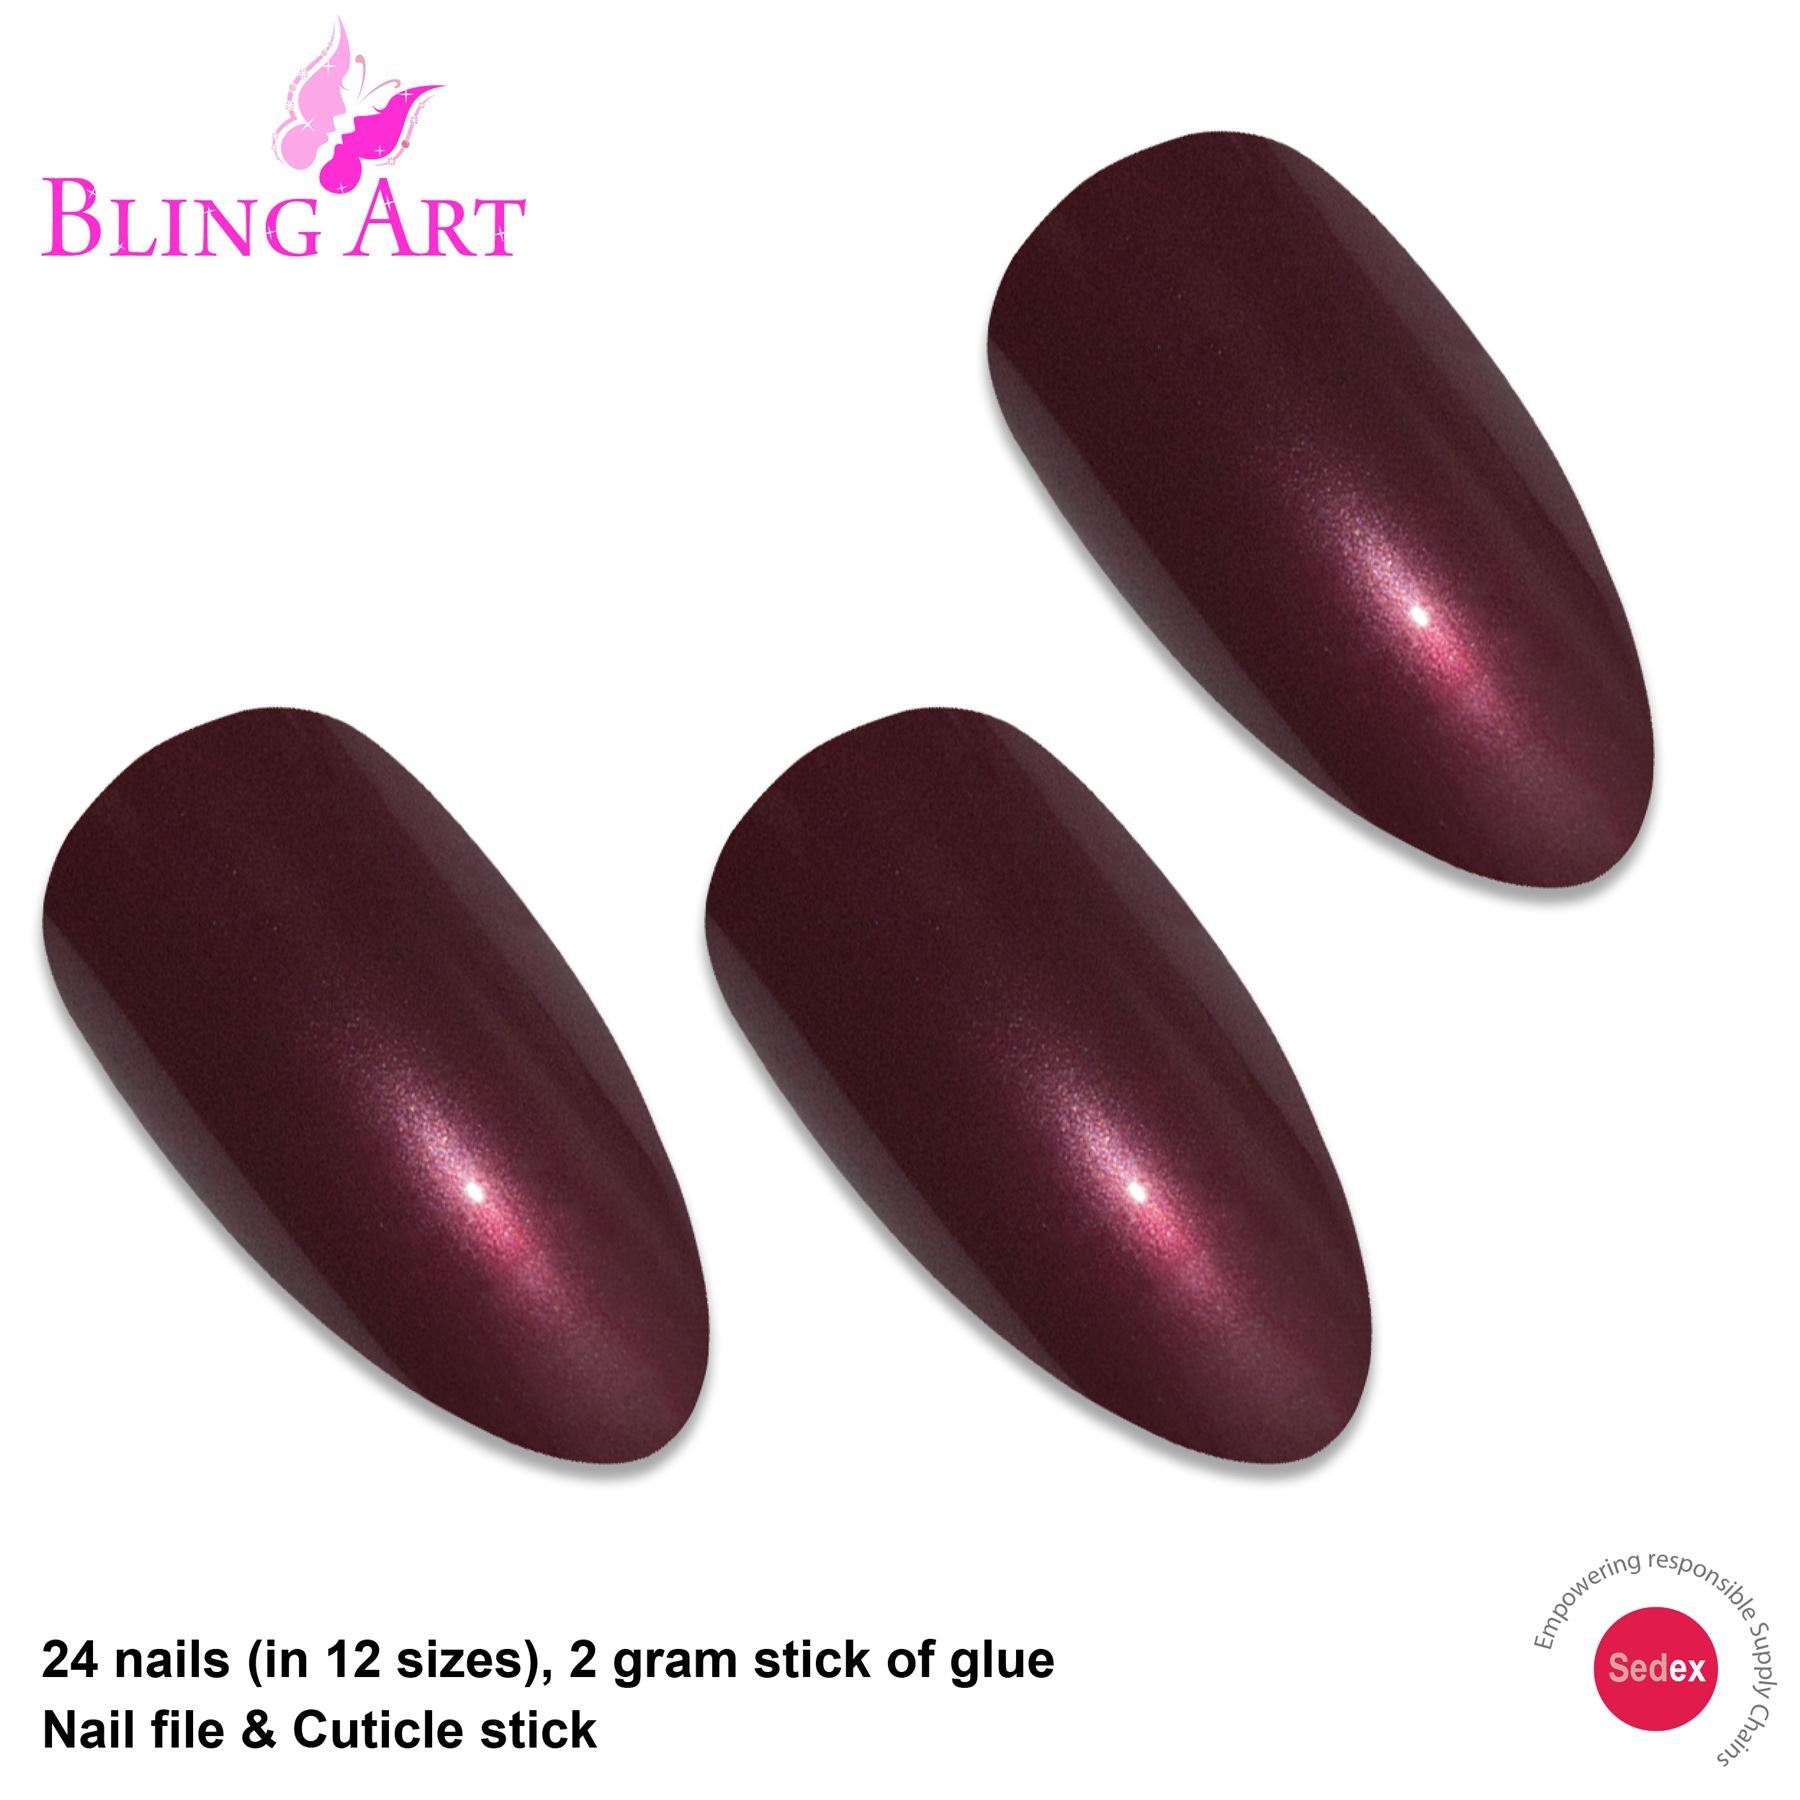 False Nails by Bling Art Red Brown Almond Stiletto Coffin 24 Fake Long Tips